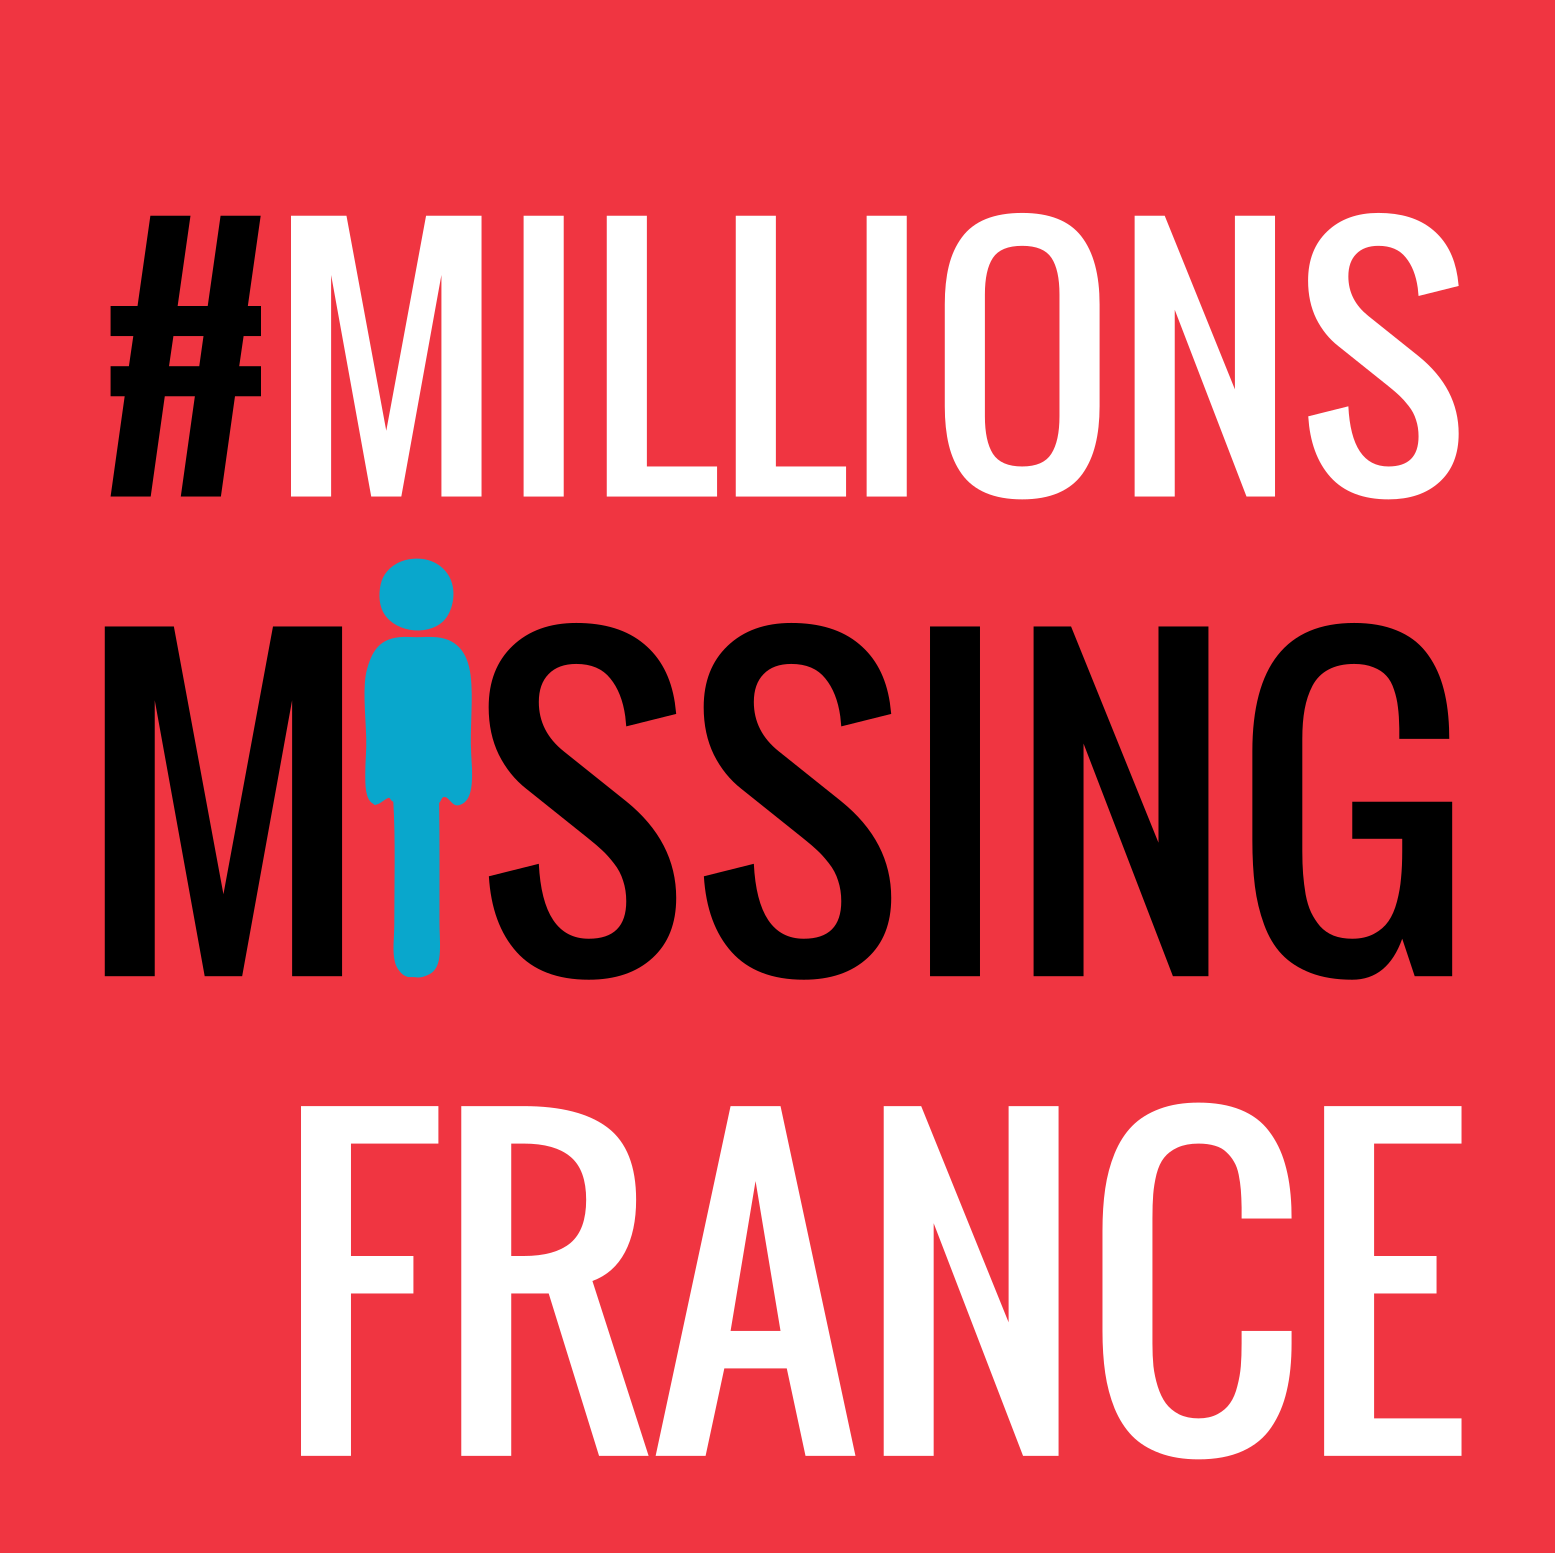 You are currently viewing Millions Missing France